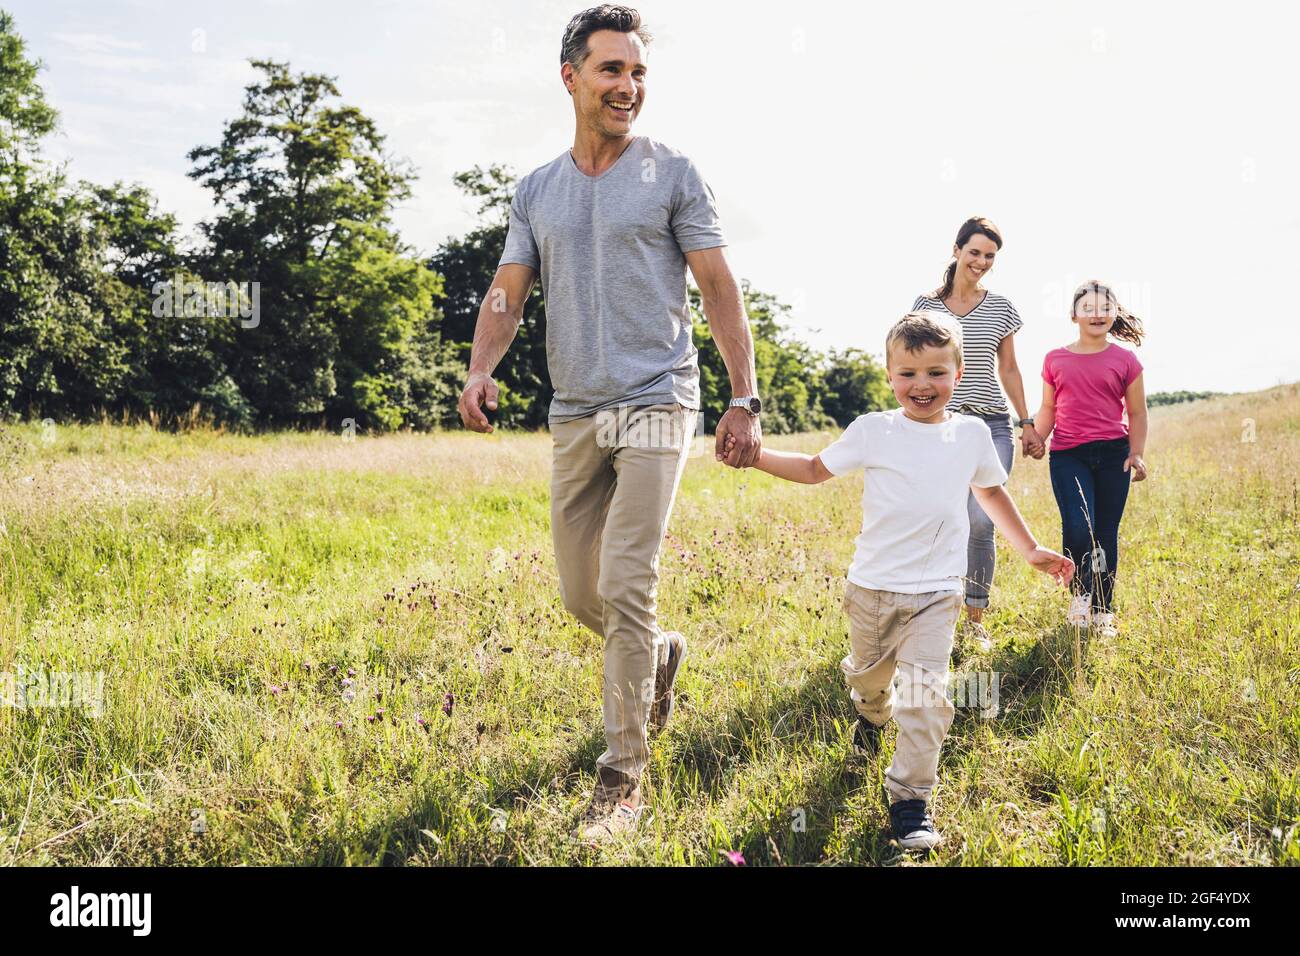 Parents holding hands of children while walking on grass during sunny day Stock Photo